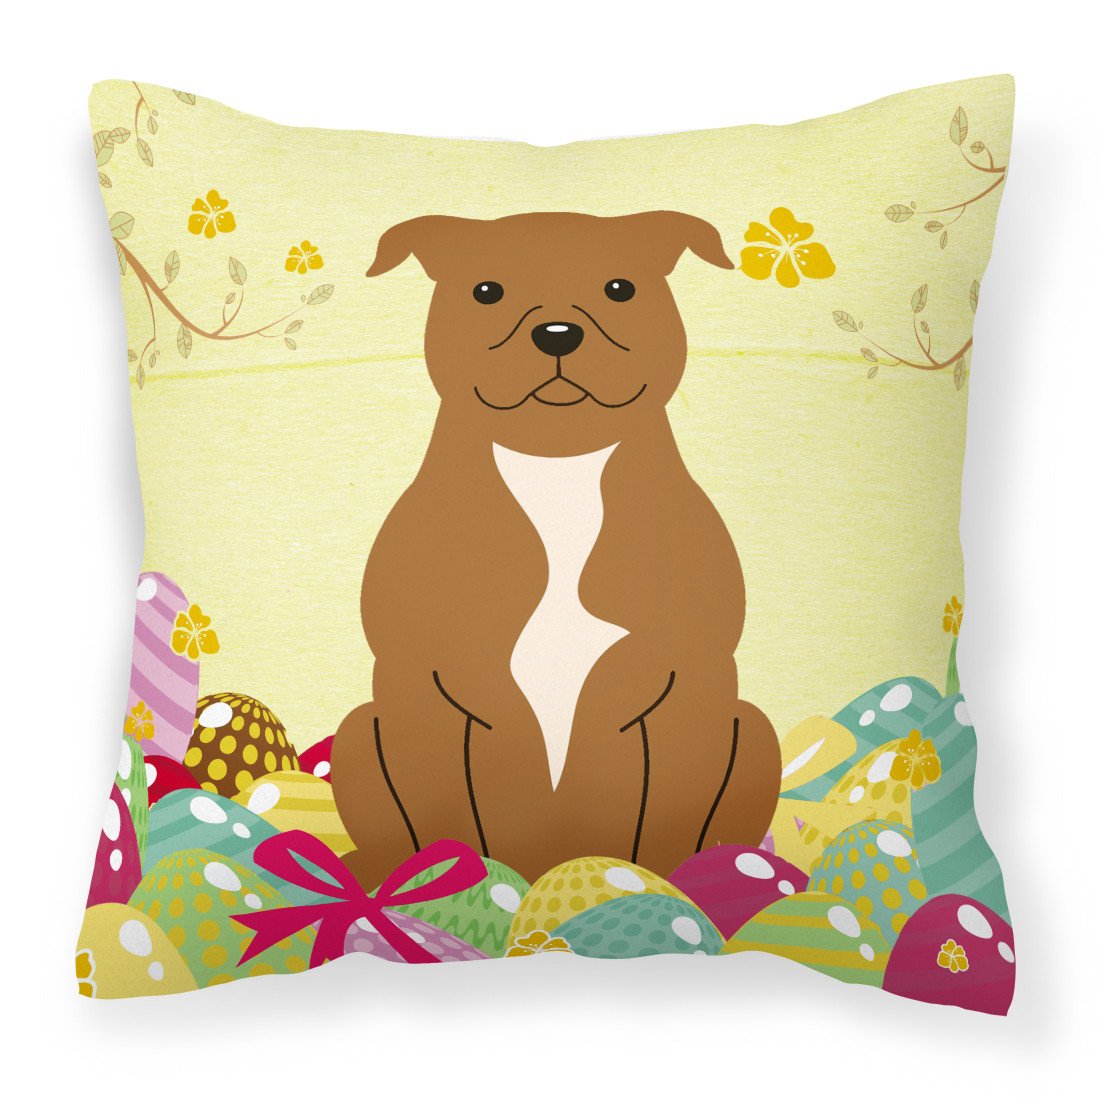 Easter Eggs Staffordshire Bull Terrier Brown Fabric Decorative Pillow BB6047PW1818 by Caroline's Treasures